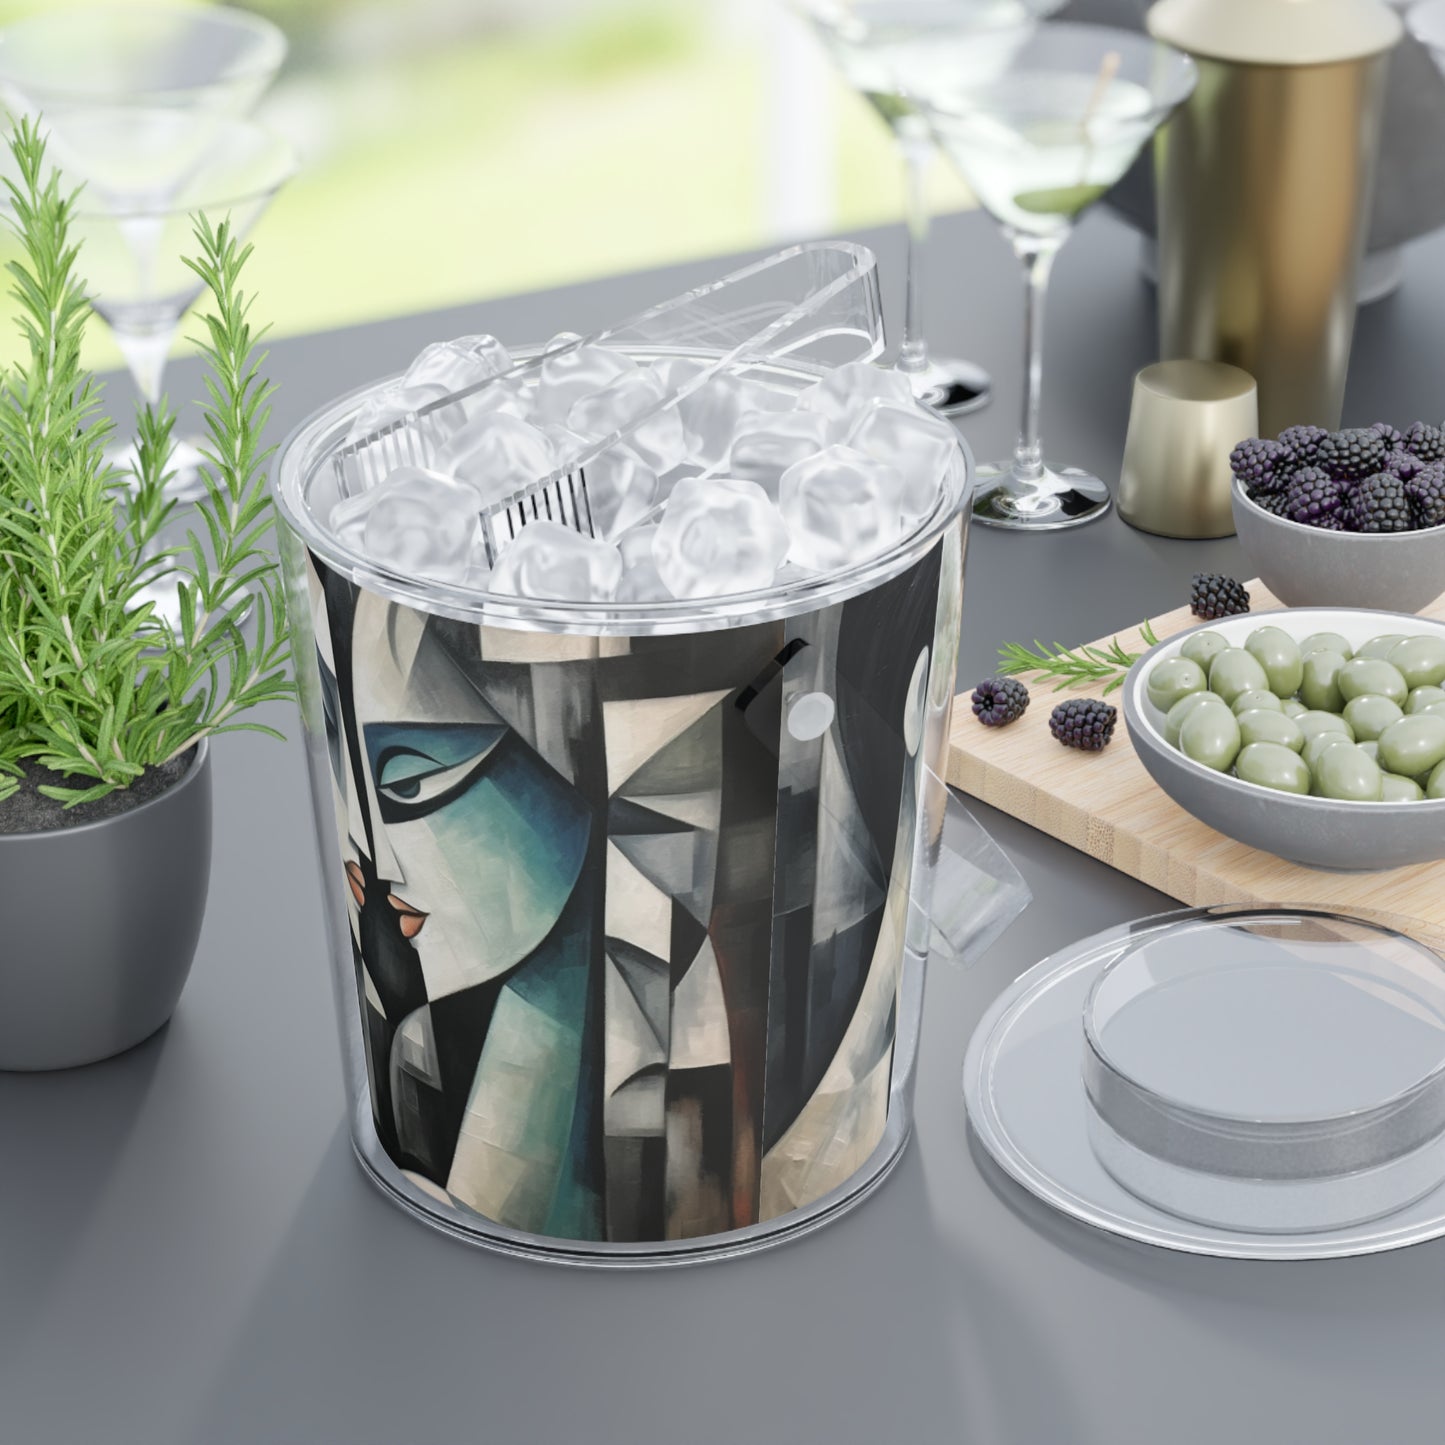 Ice Bucket with Tongs with Cubist Art: Sip with Artistic Finesse and Abstract Flair